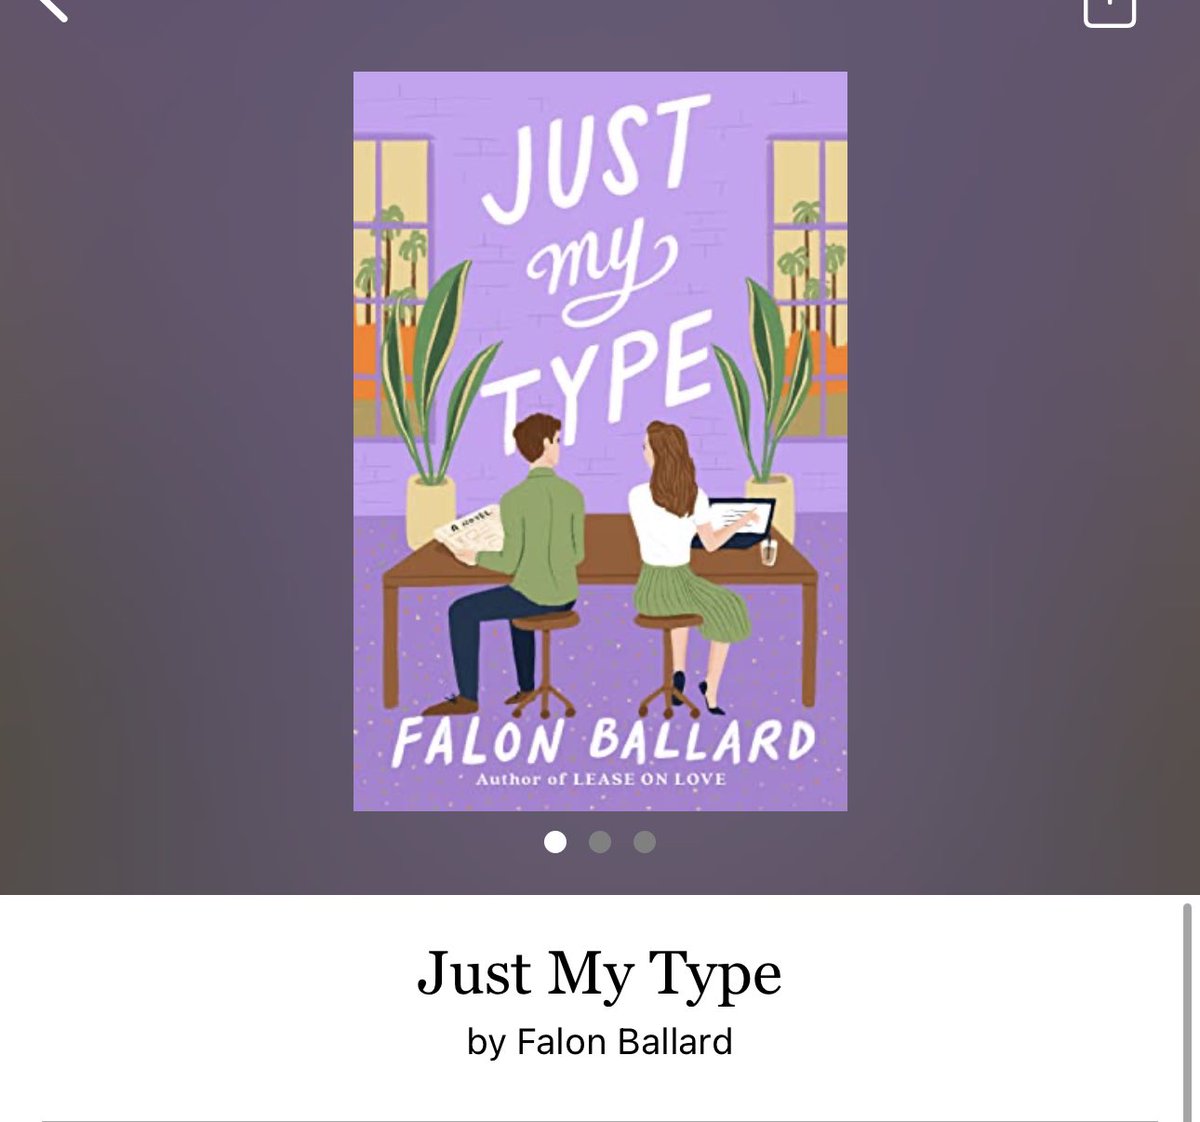 Just My Type by Falon Ballard 

#JustMyType by #FalonBallard #4689 #32chapters #368pages #march2023 #232of400 #NewRelease #61for16 #LaraAndSeth #10hourAudiobook #clearingoffreadingshelves #whatsNext #readitquick